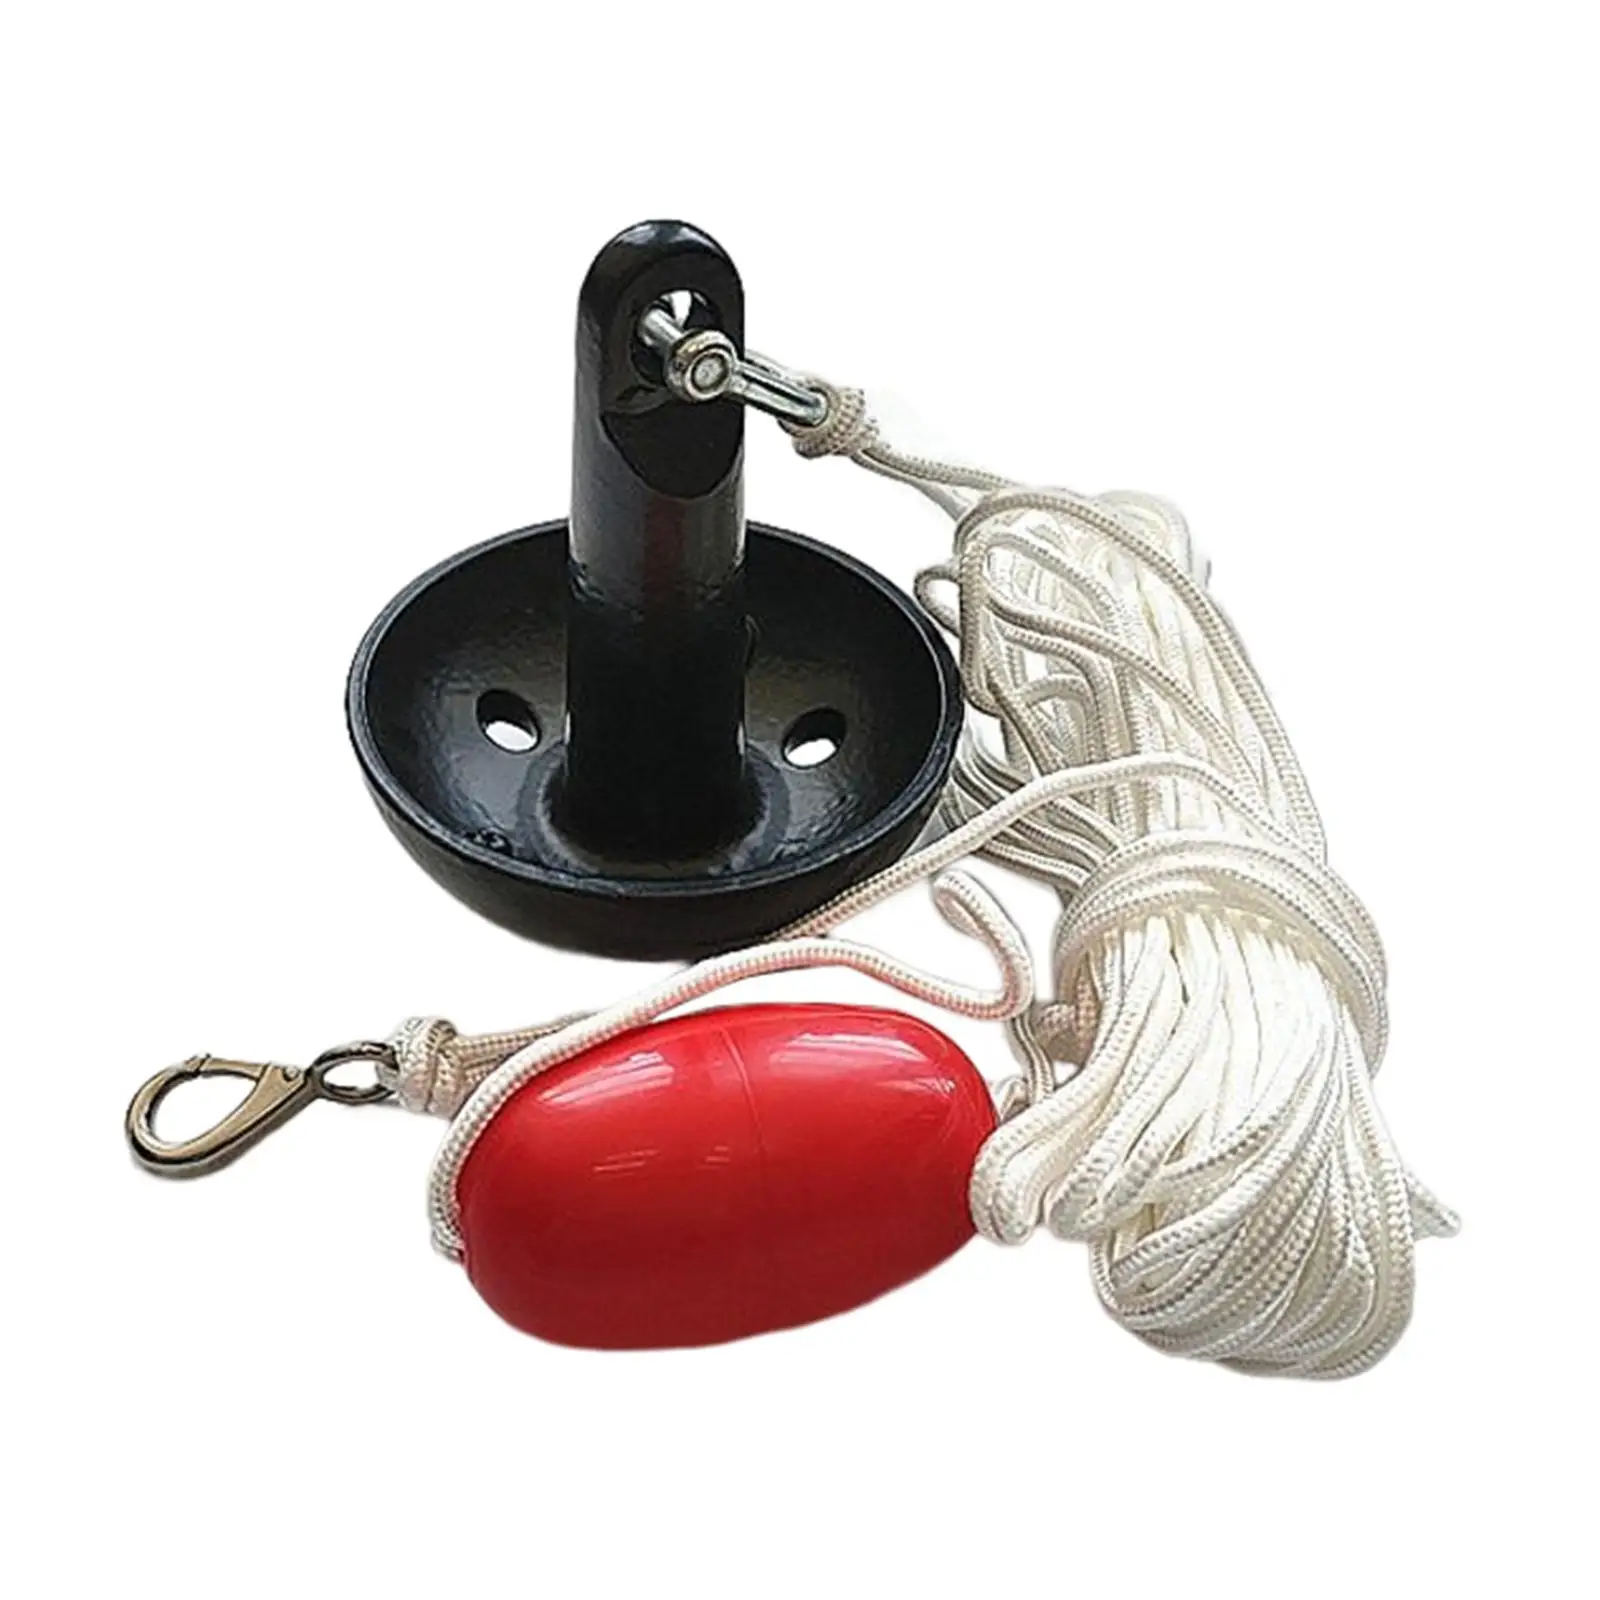 Complete Mushroom Anchor Kit 5 lb PE Coated Finish Fit for Paddle Board